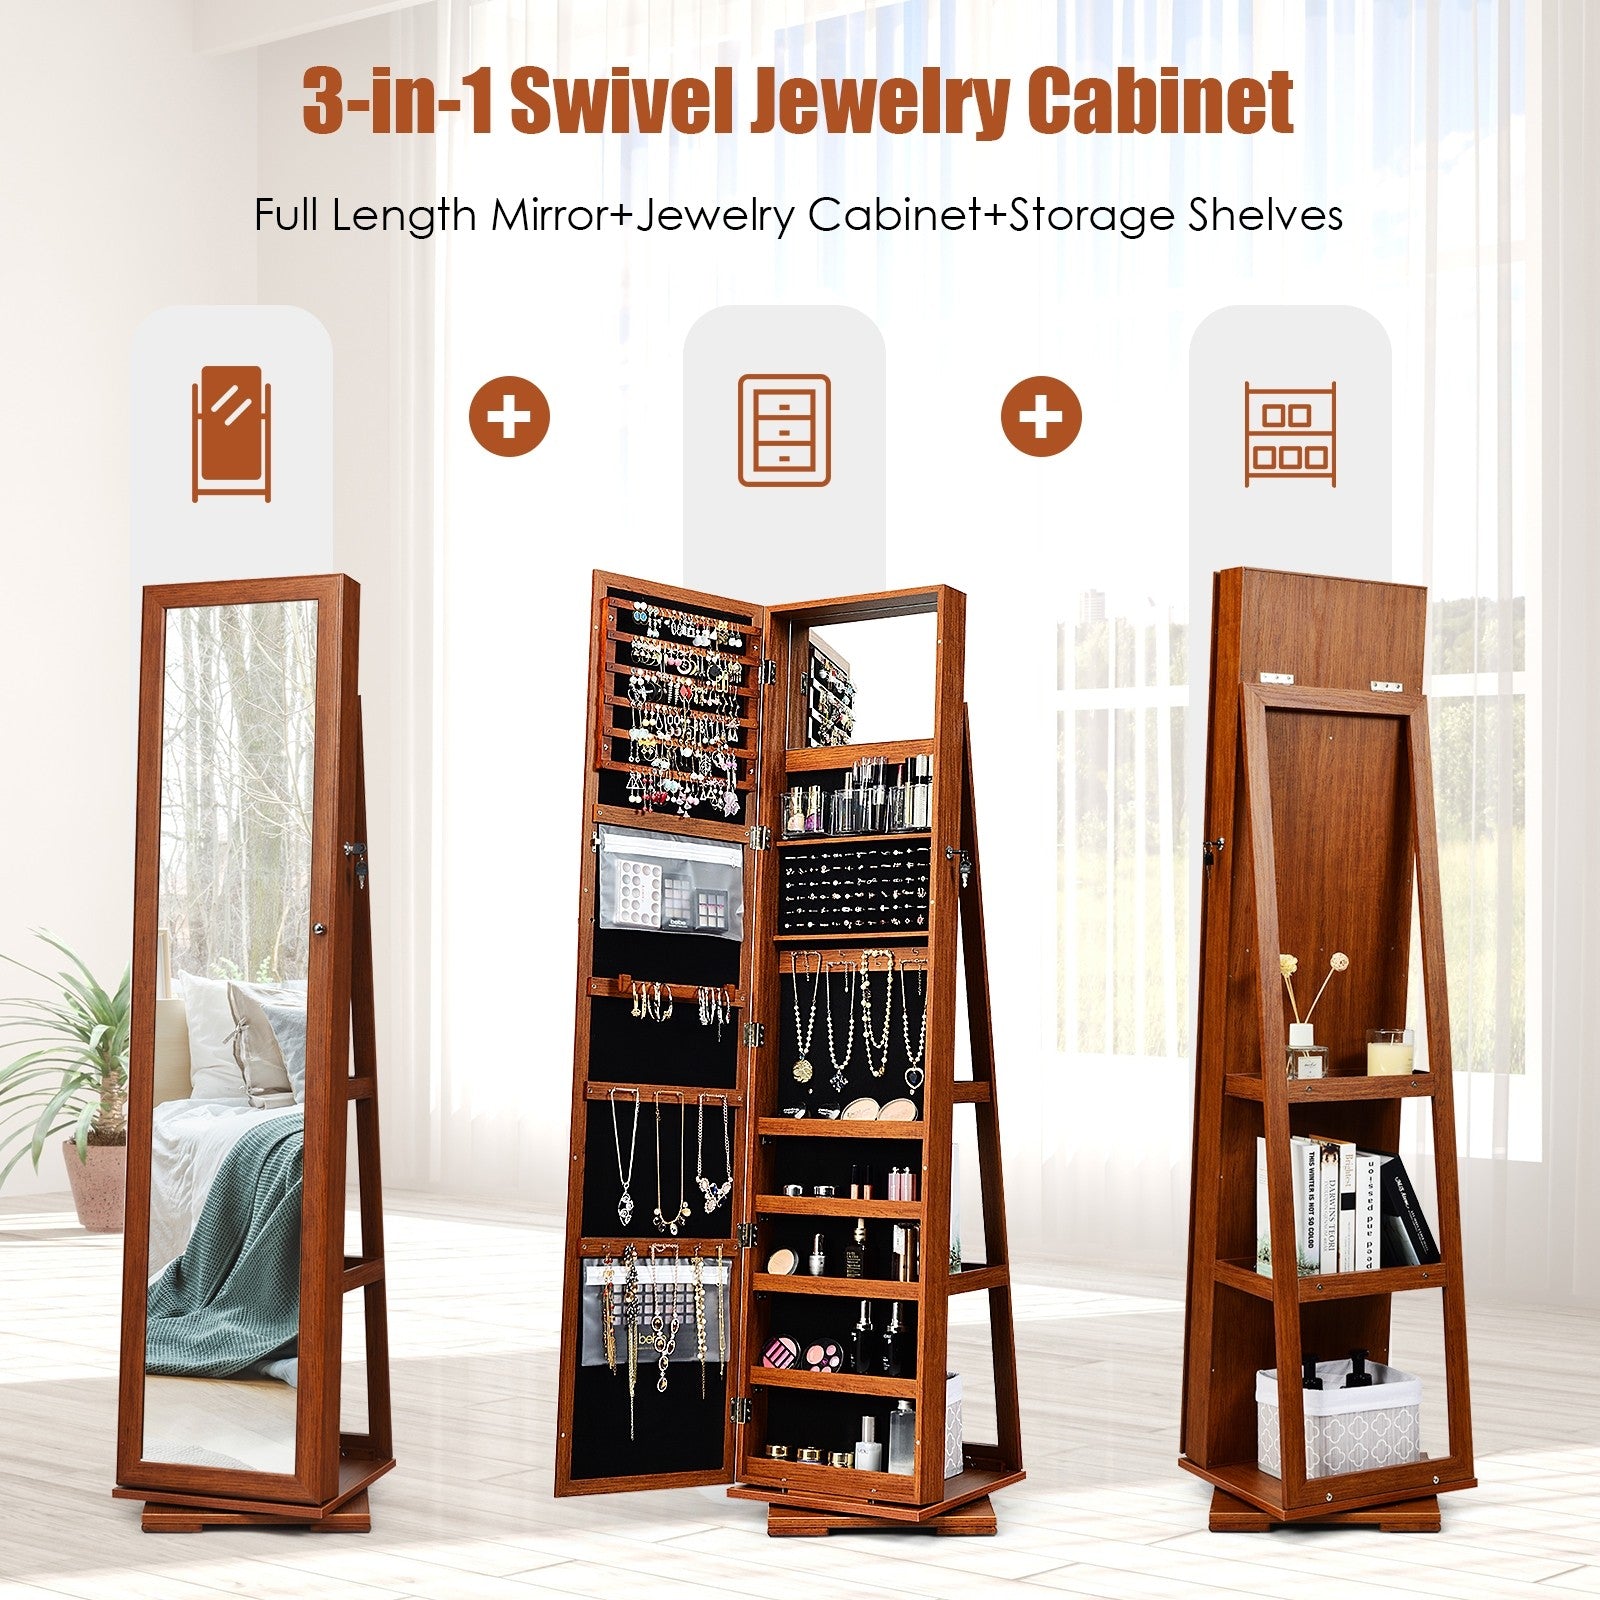 CHARMAID | 360?? Rotating Jewelry Armoire with Higher Full Length Mirror - Giantexus